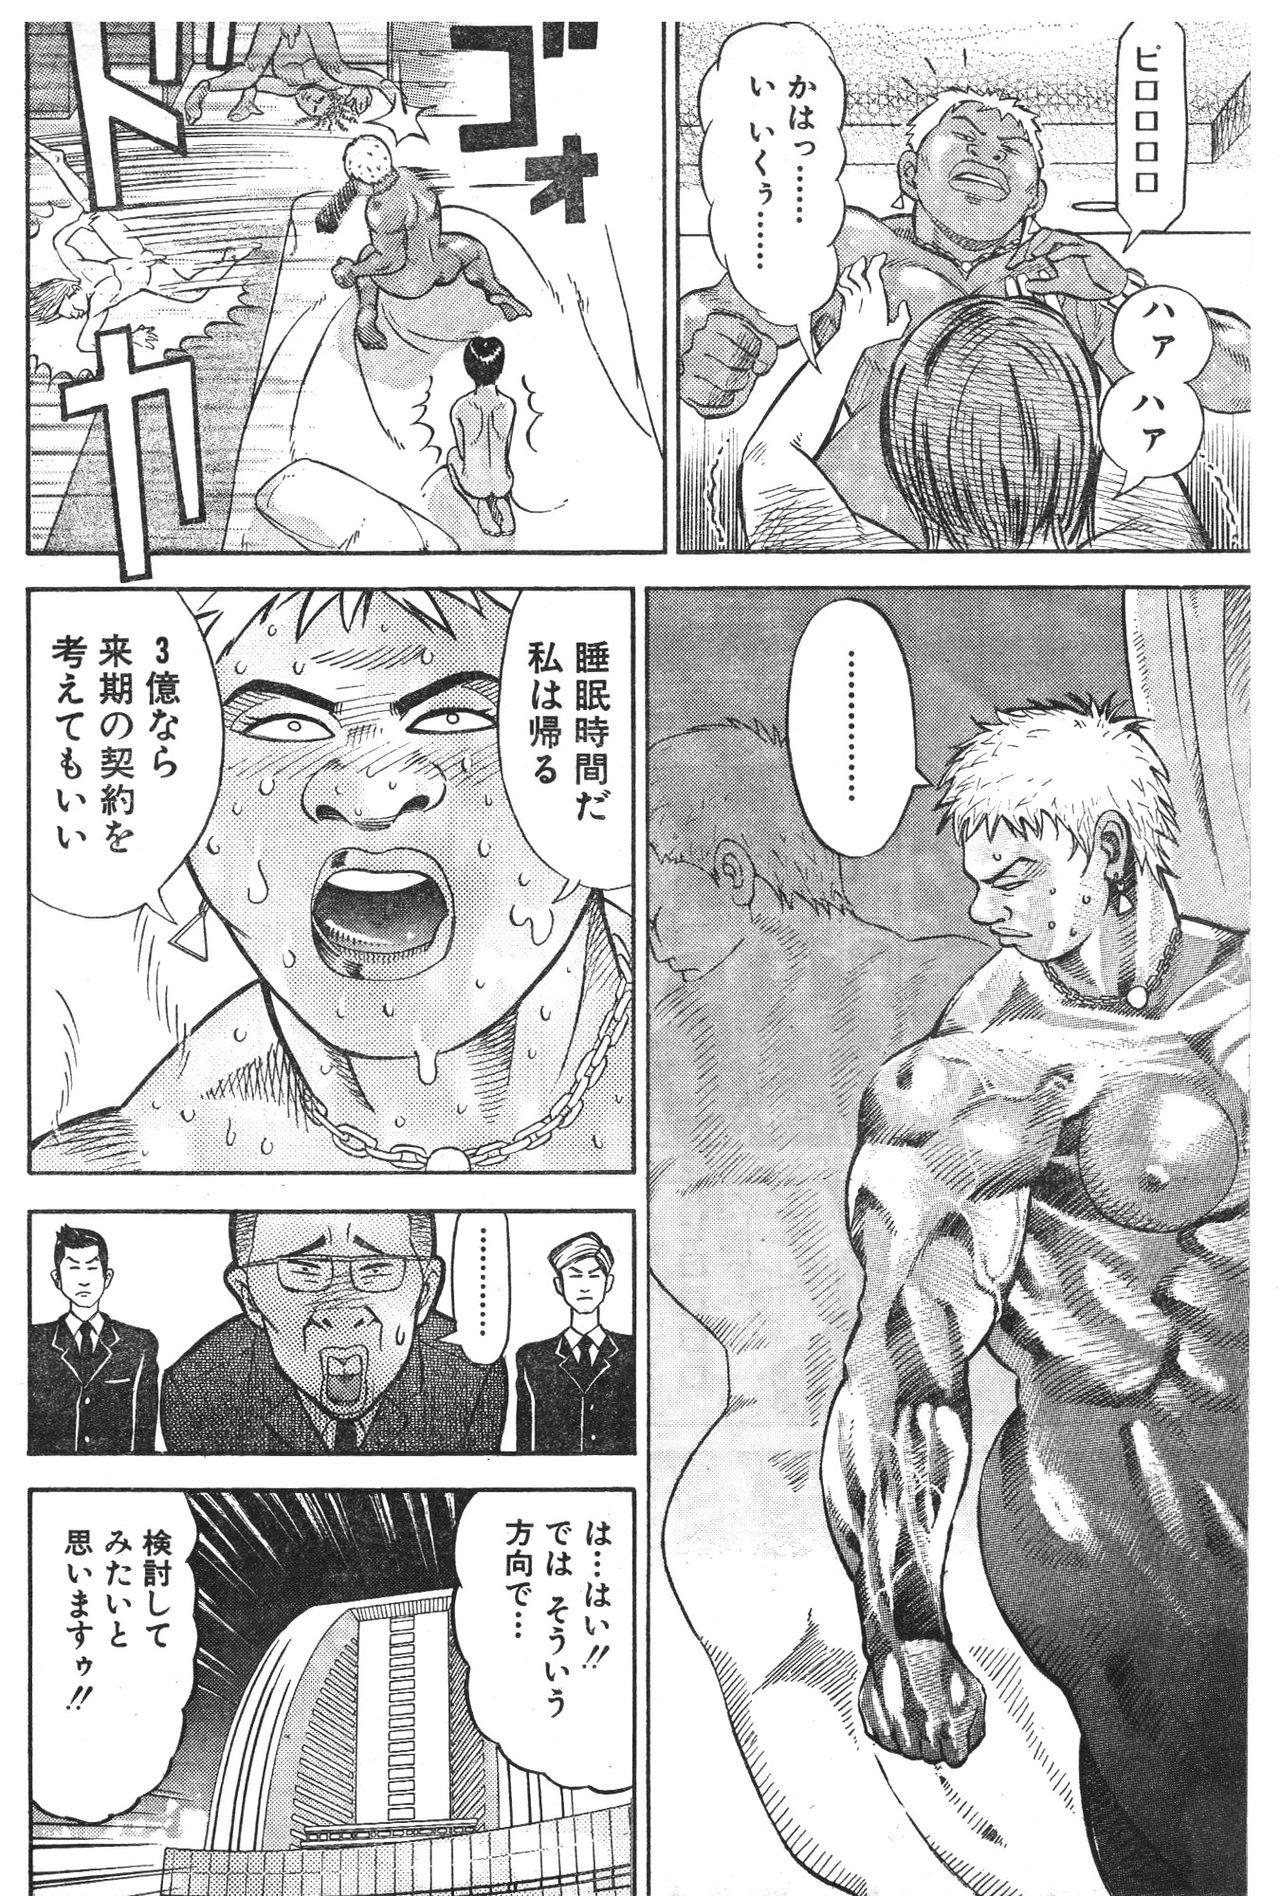 Muscle Strawberry Chapter 1 15